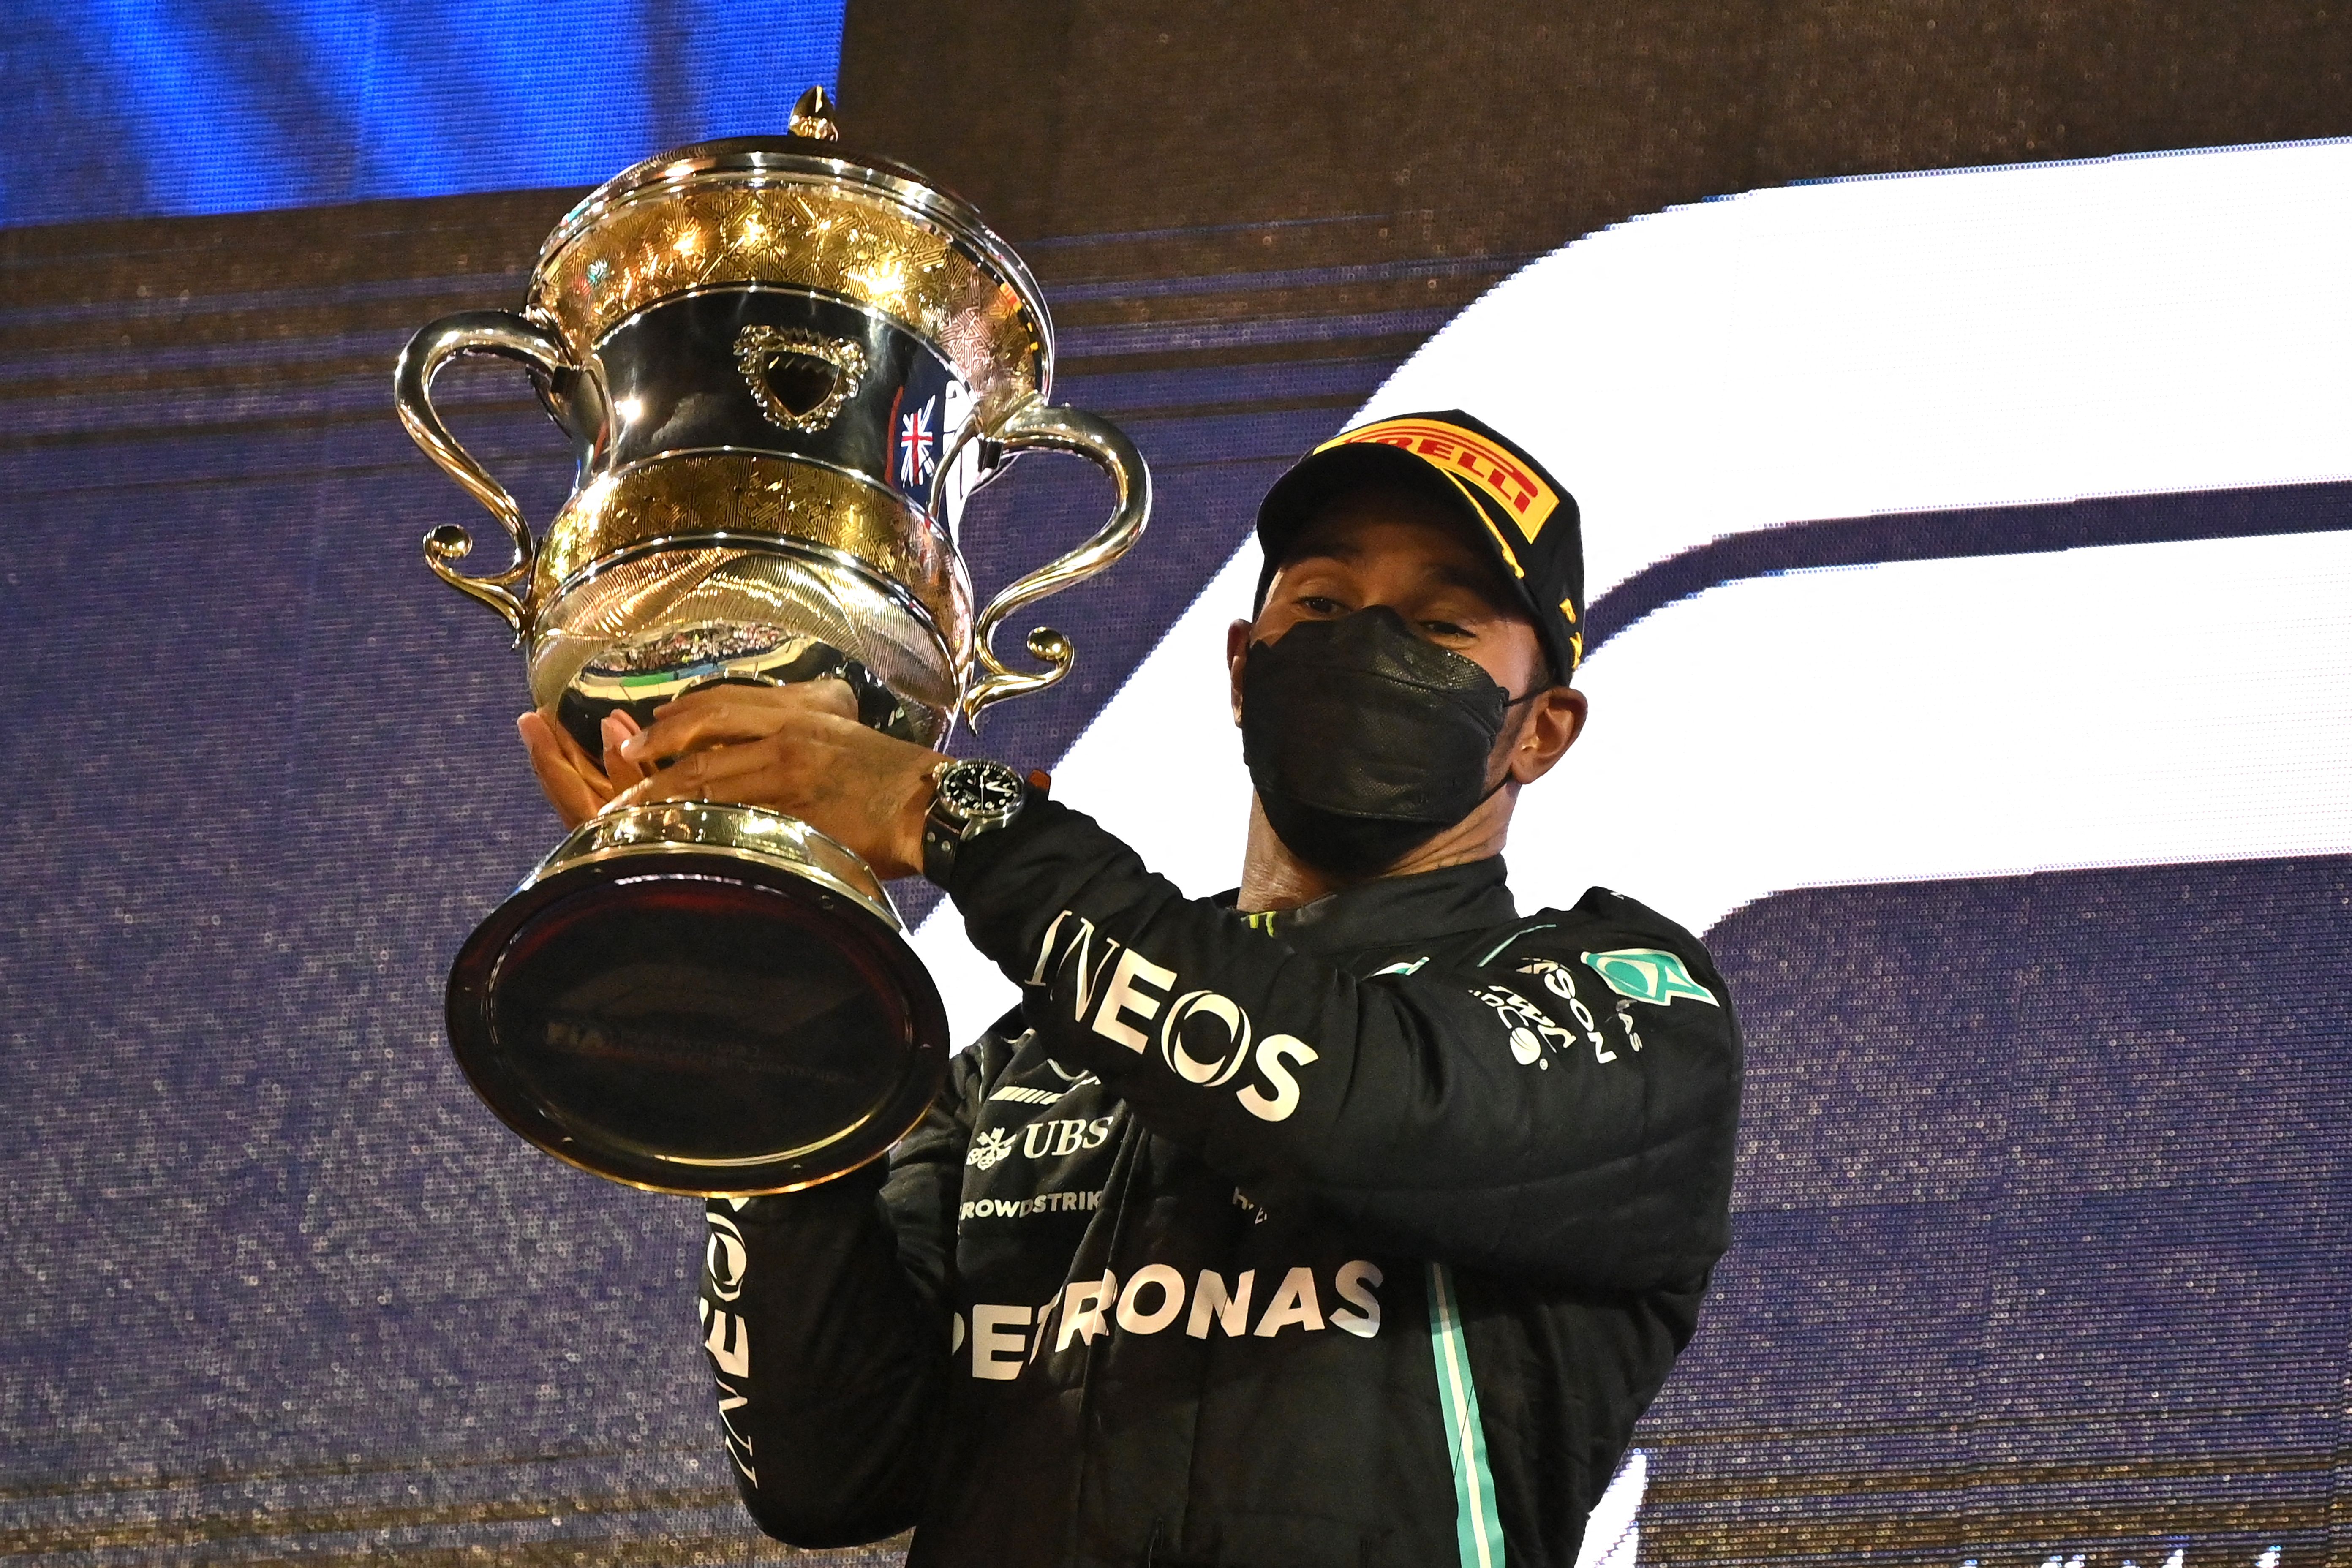 Hamilton edged Verstappen to an ‘impossible’ win in Bahrain